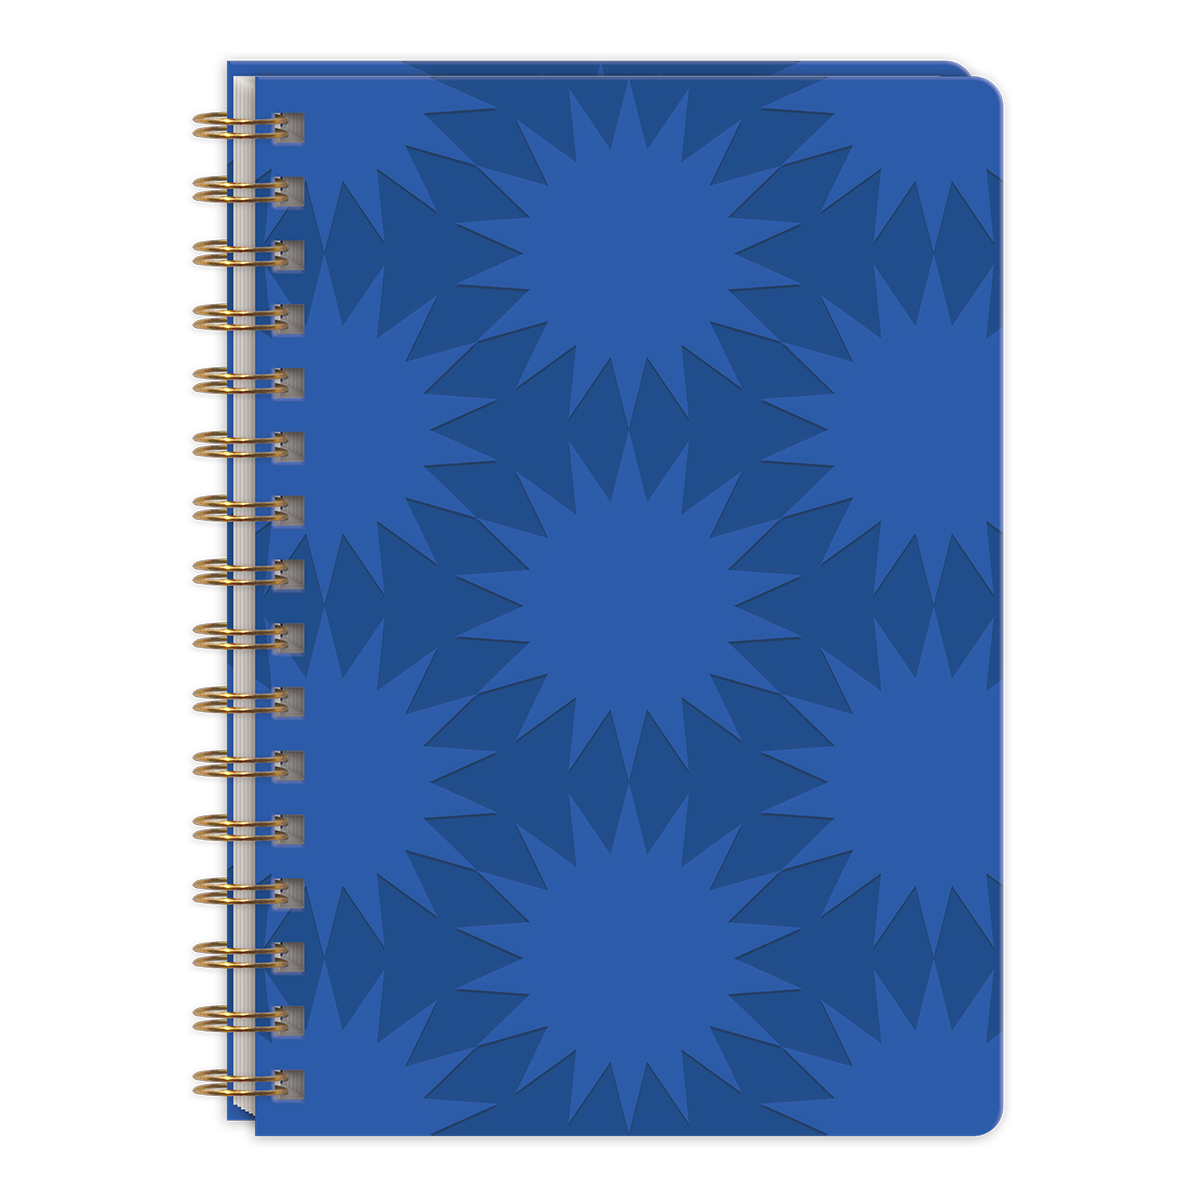 Statement Shapes Blue Spiral Journal Product